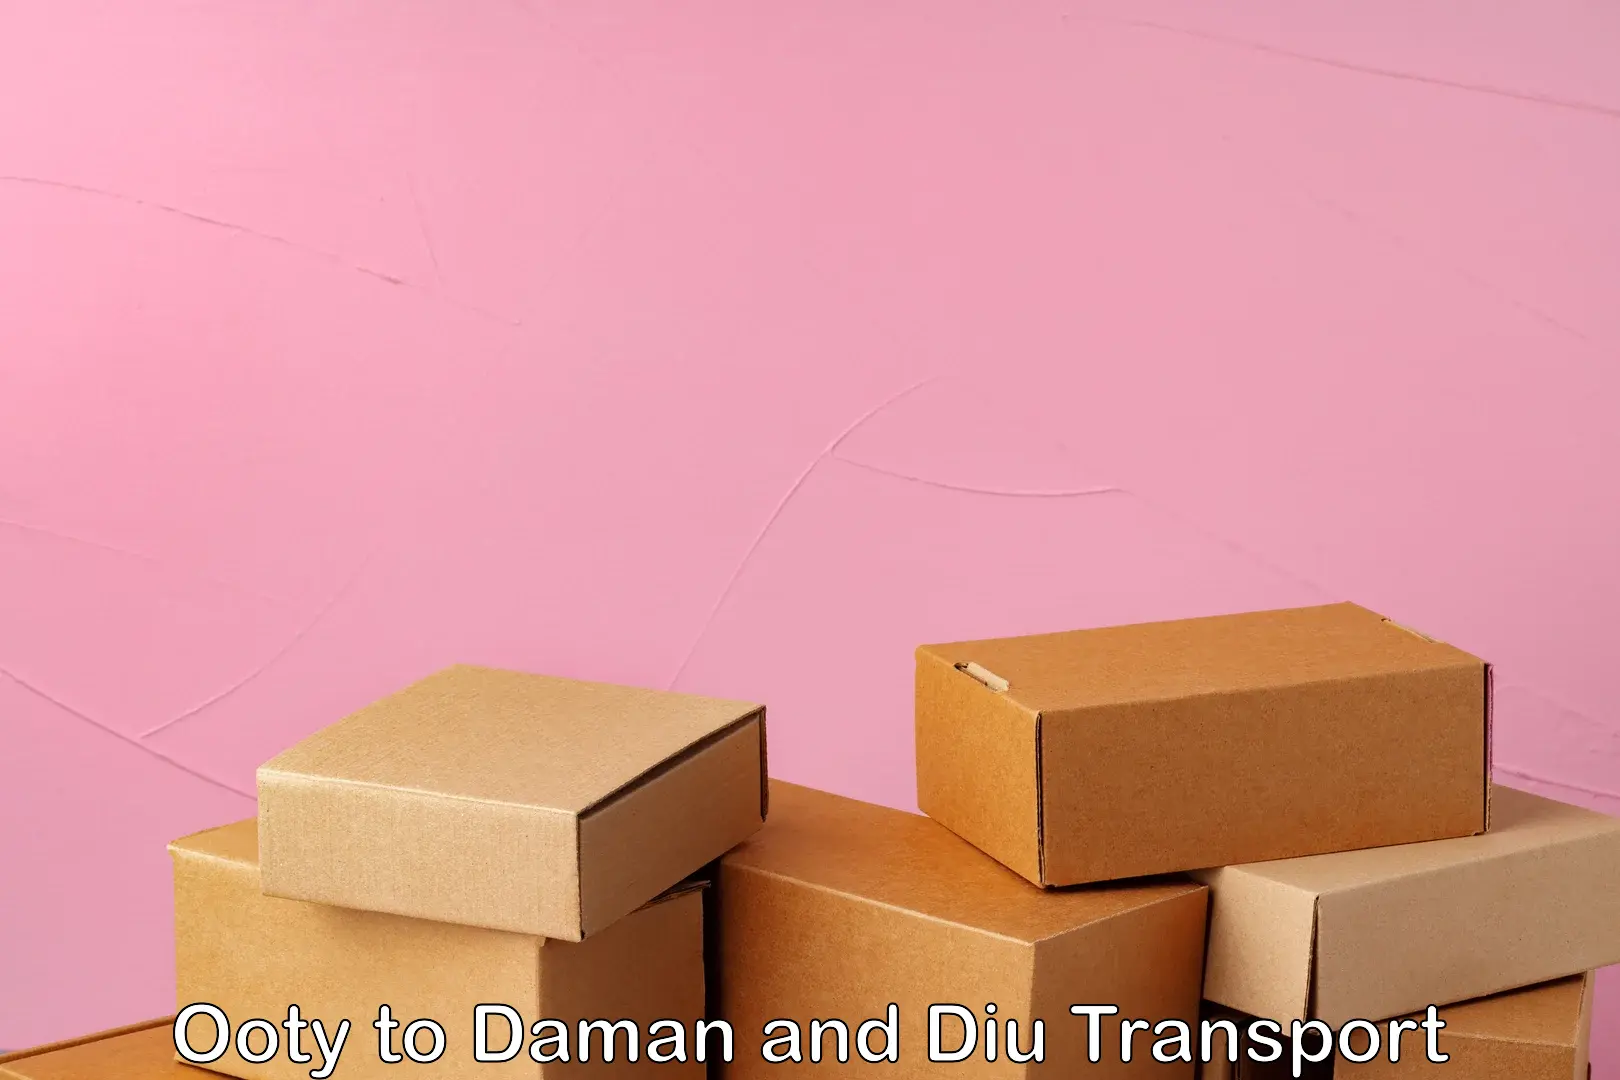 Shipping partner Ooty to Daman and Diu